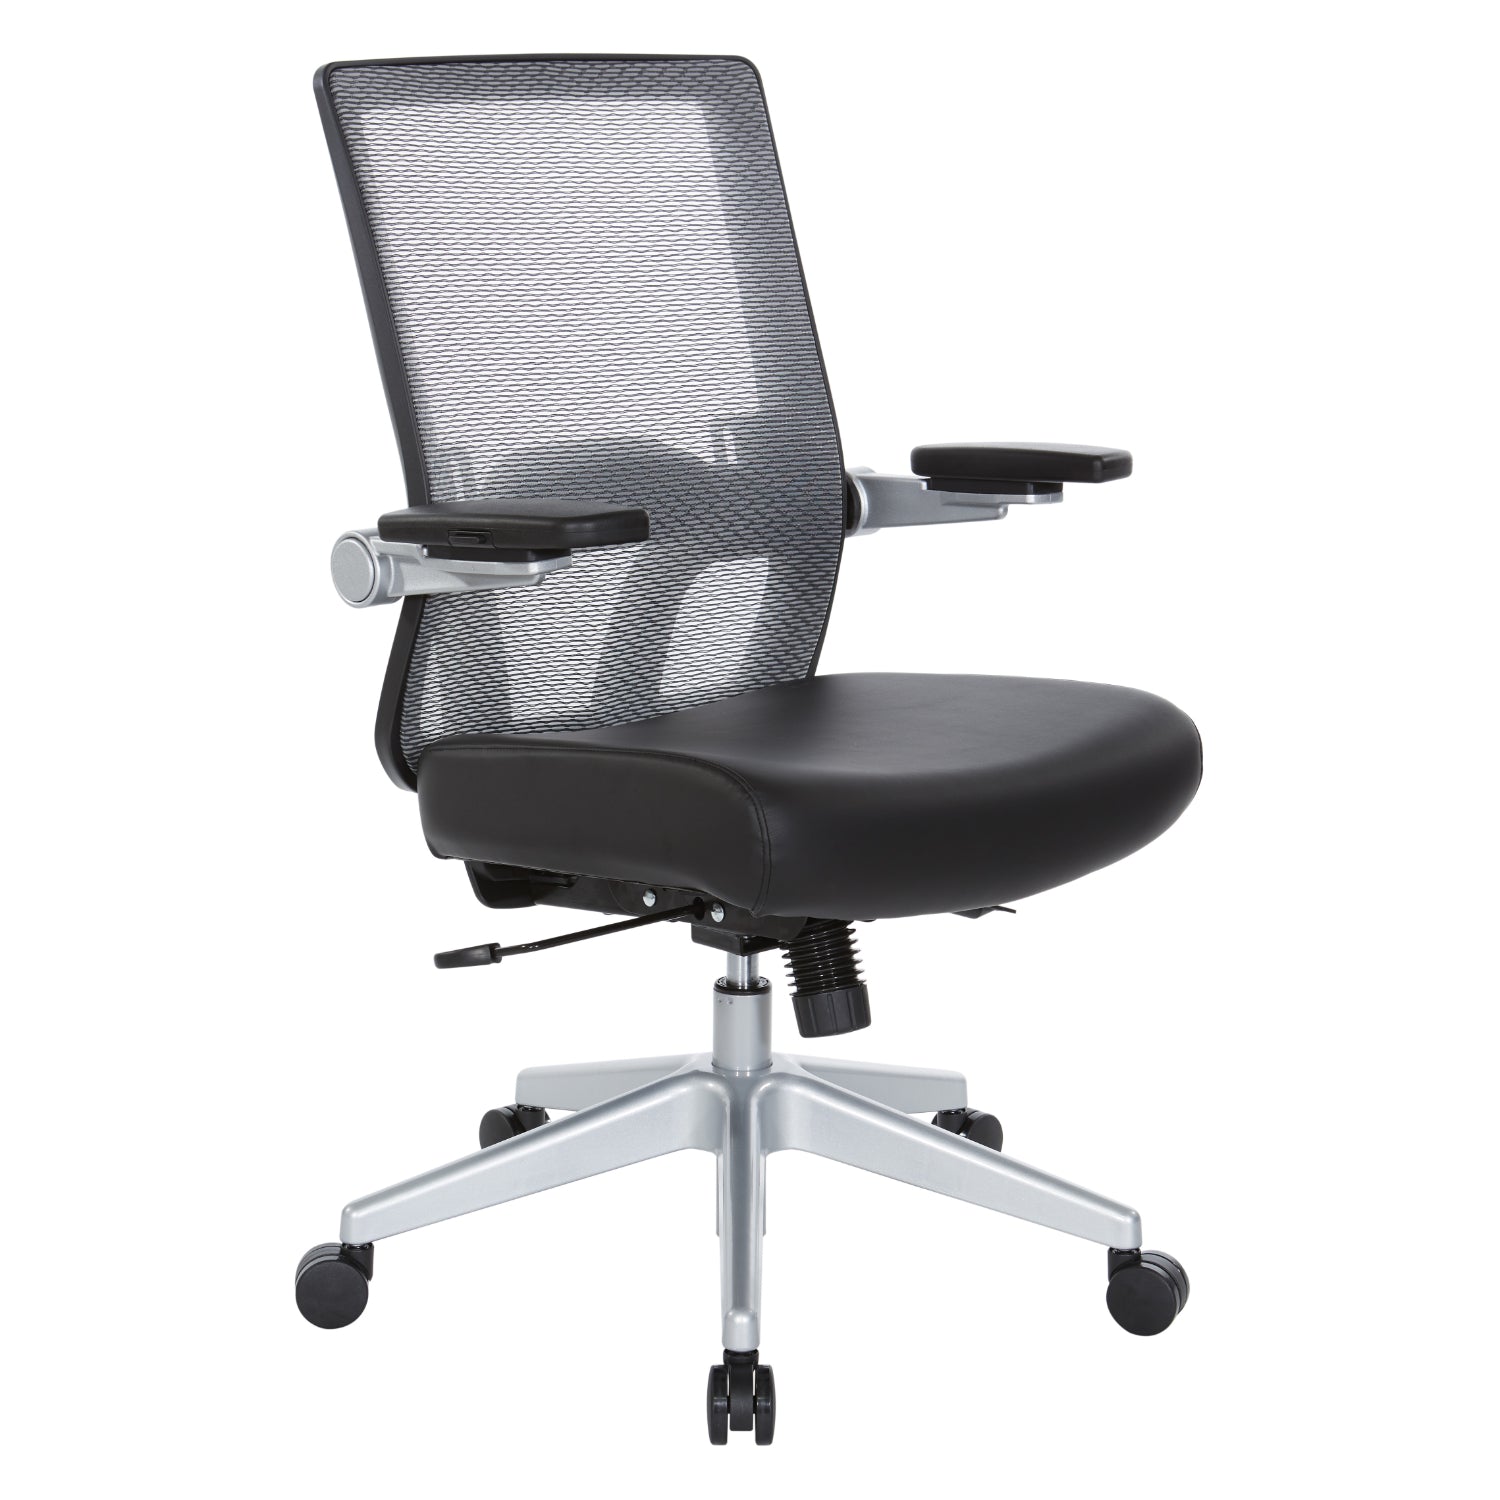 Breathable Mesh Back Manager's Chair with 4” Thick Bonded Leather Seat, Height Adjustable Lumbar Support, 3-Way PU Padded Cantilever Adjustable Flip Arms and Silver Nylon Base